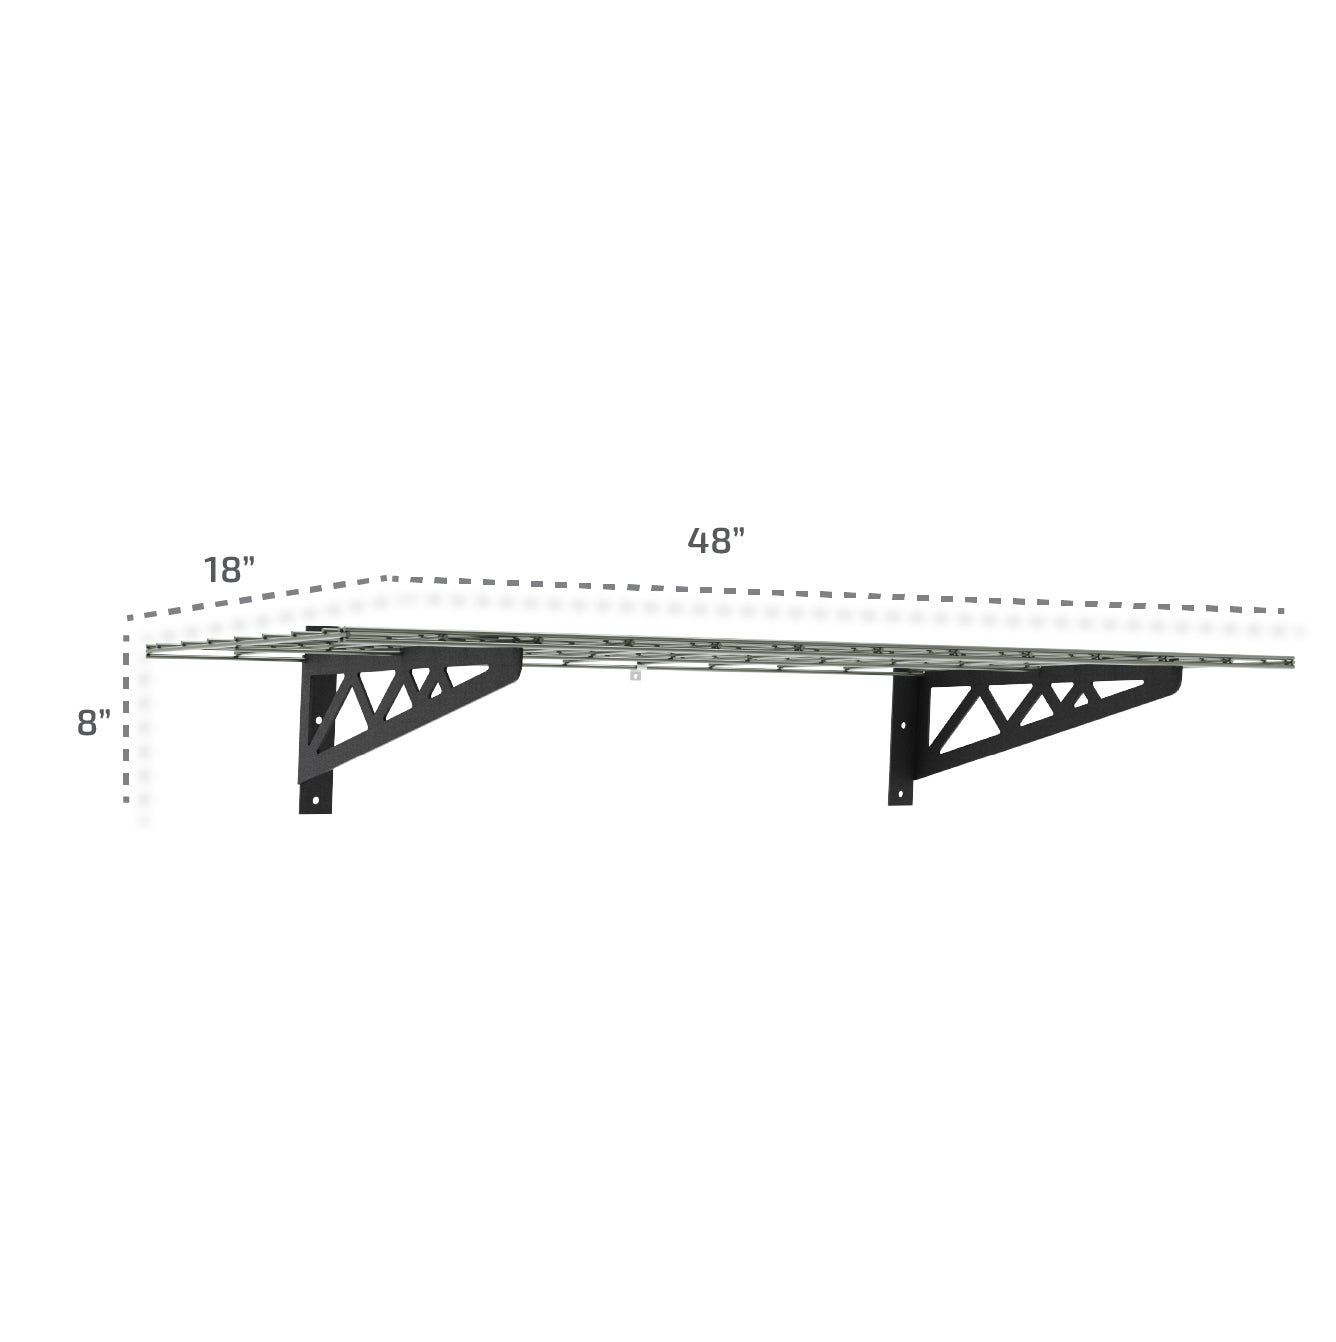 18’ x 48’ Wall Shelves (Two Pack with Hooks) - Mounted